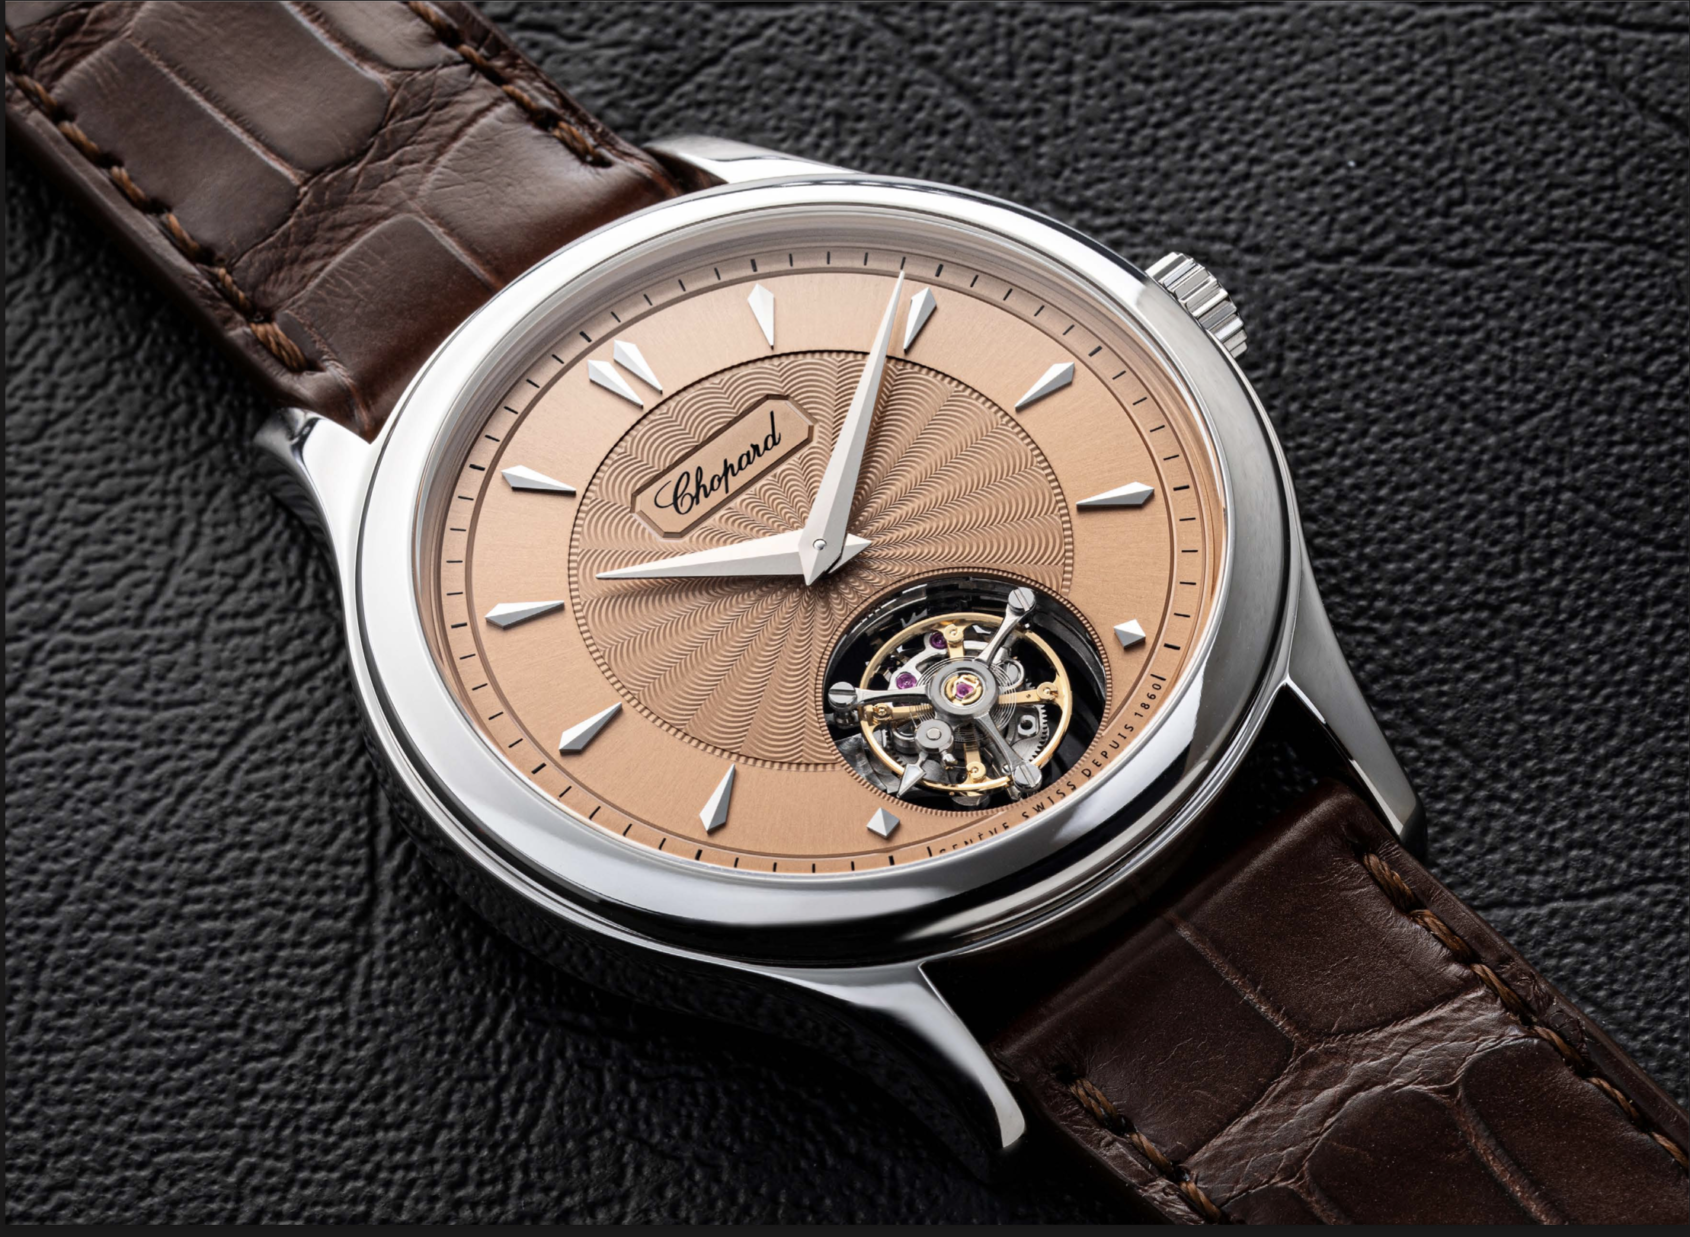 Introducing the Chopard L.U.C 1860 Flying T, Special Revolution -  Revolution Watch